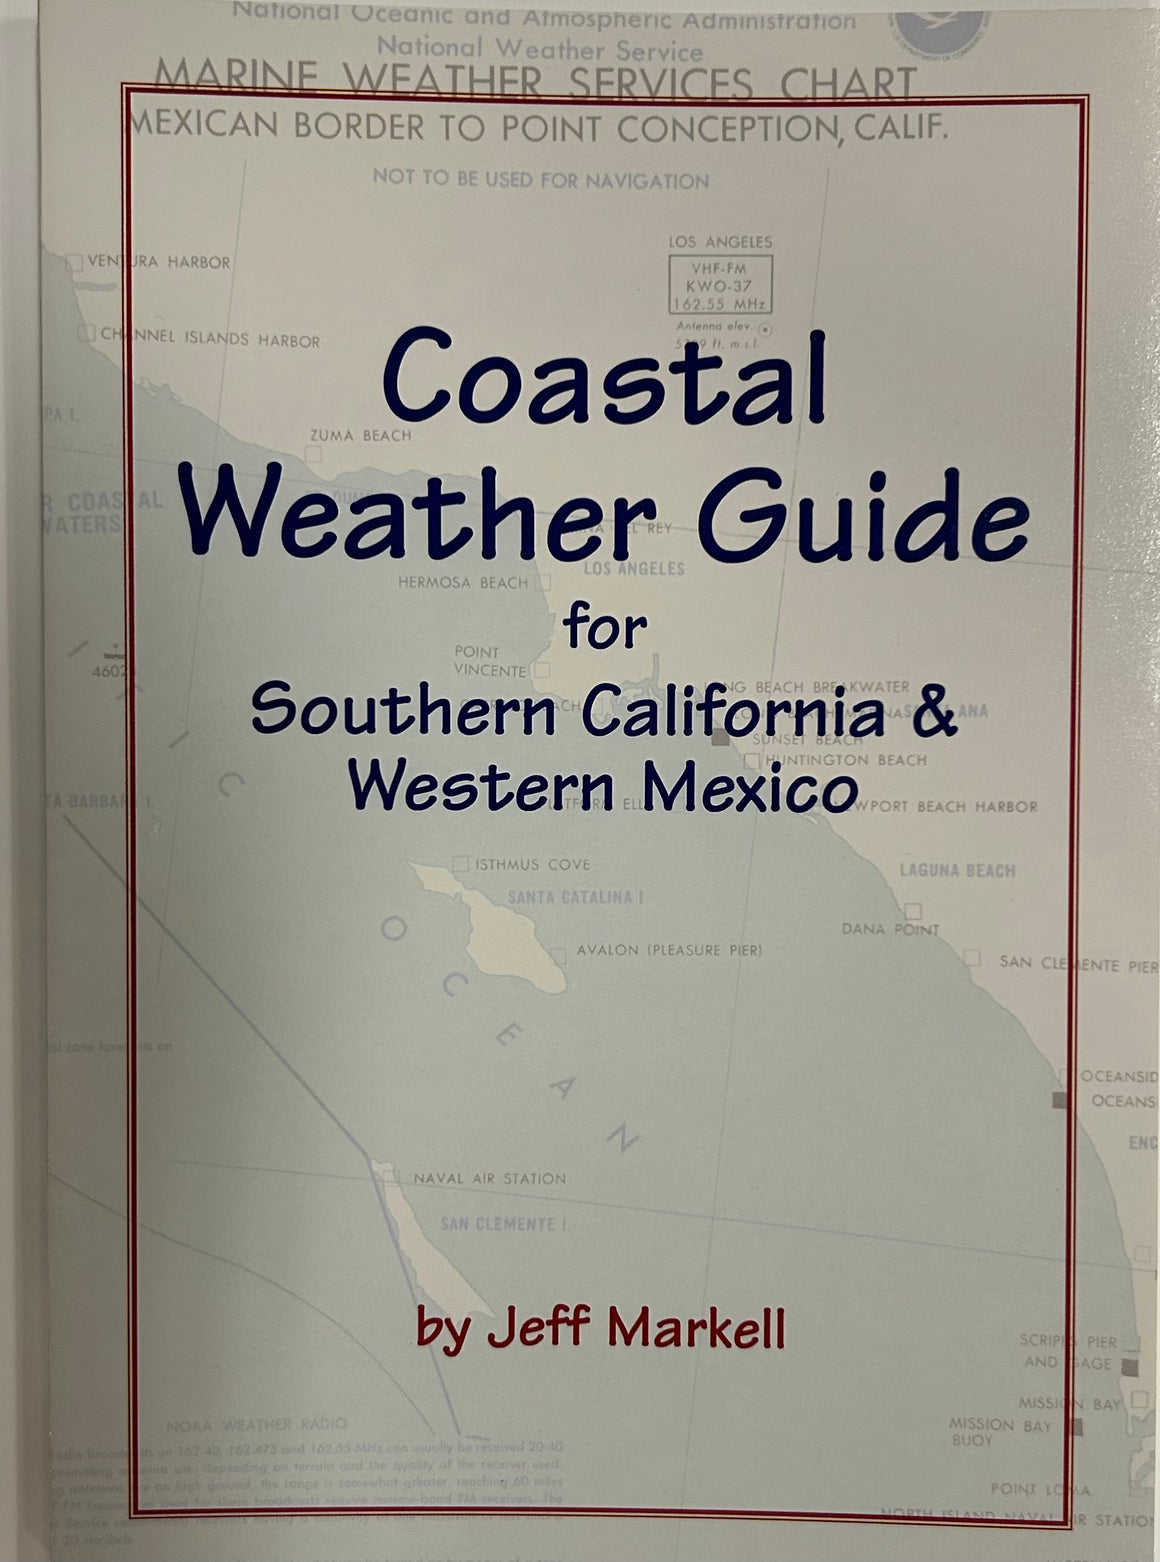 Coastal Weather Guide for Southern California & Western Mexico